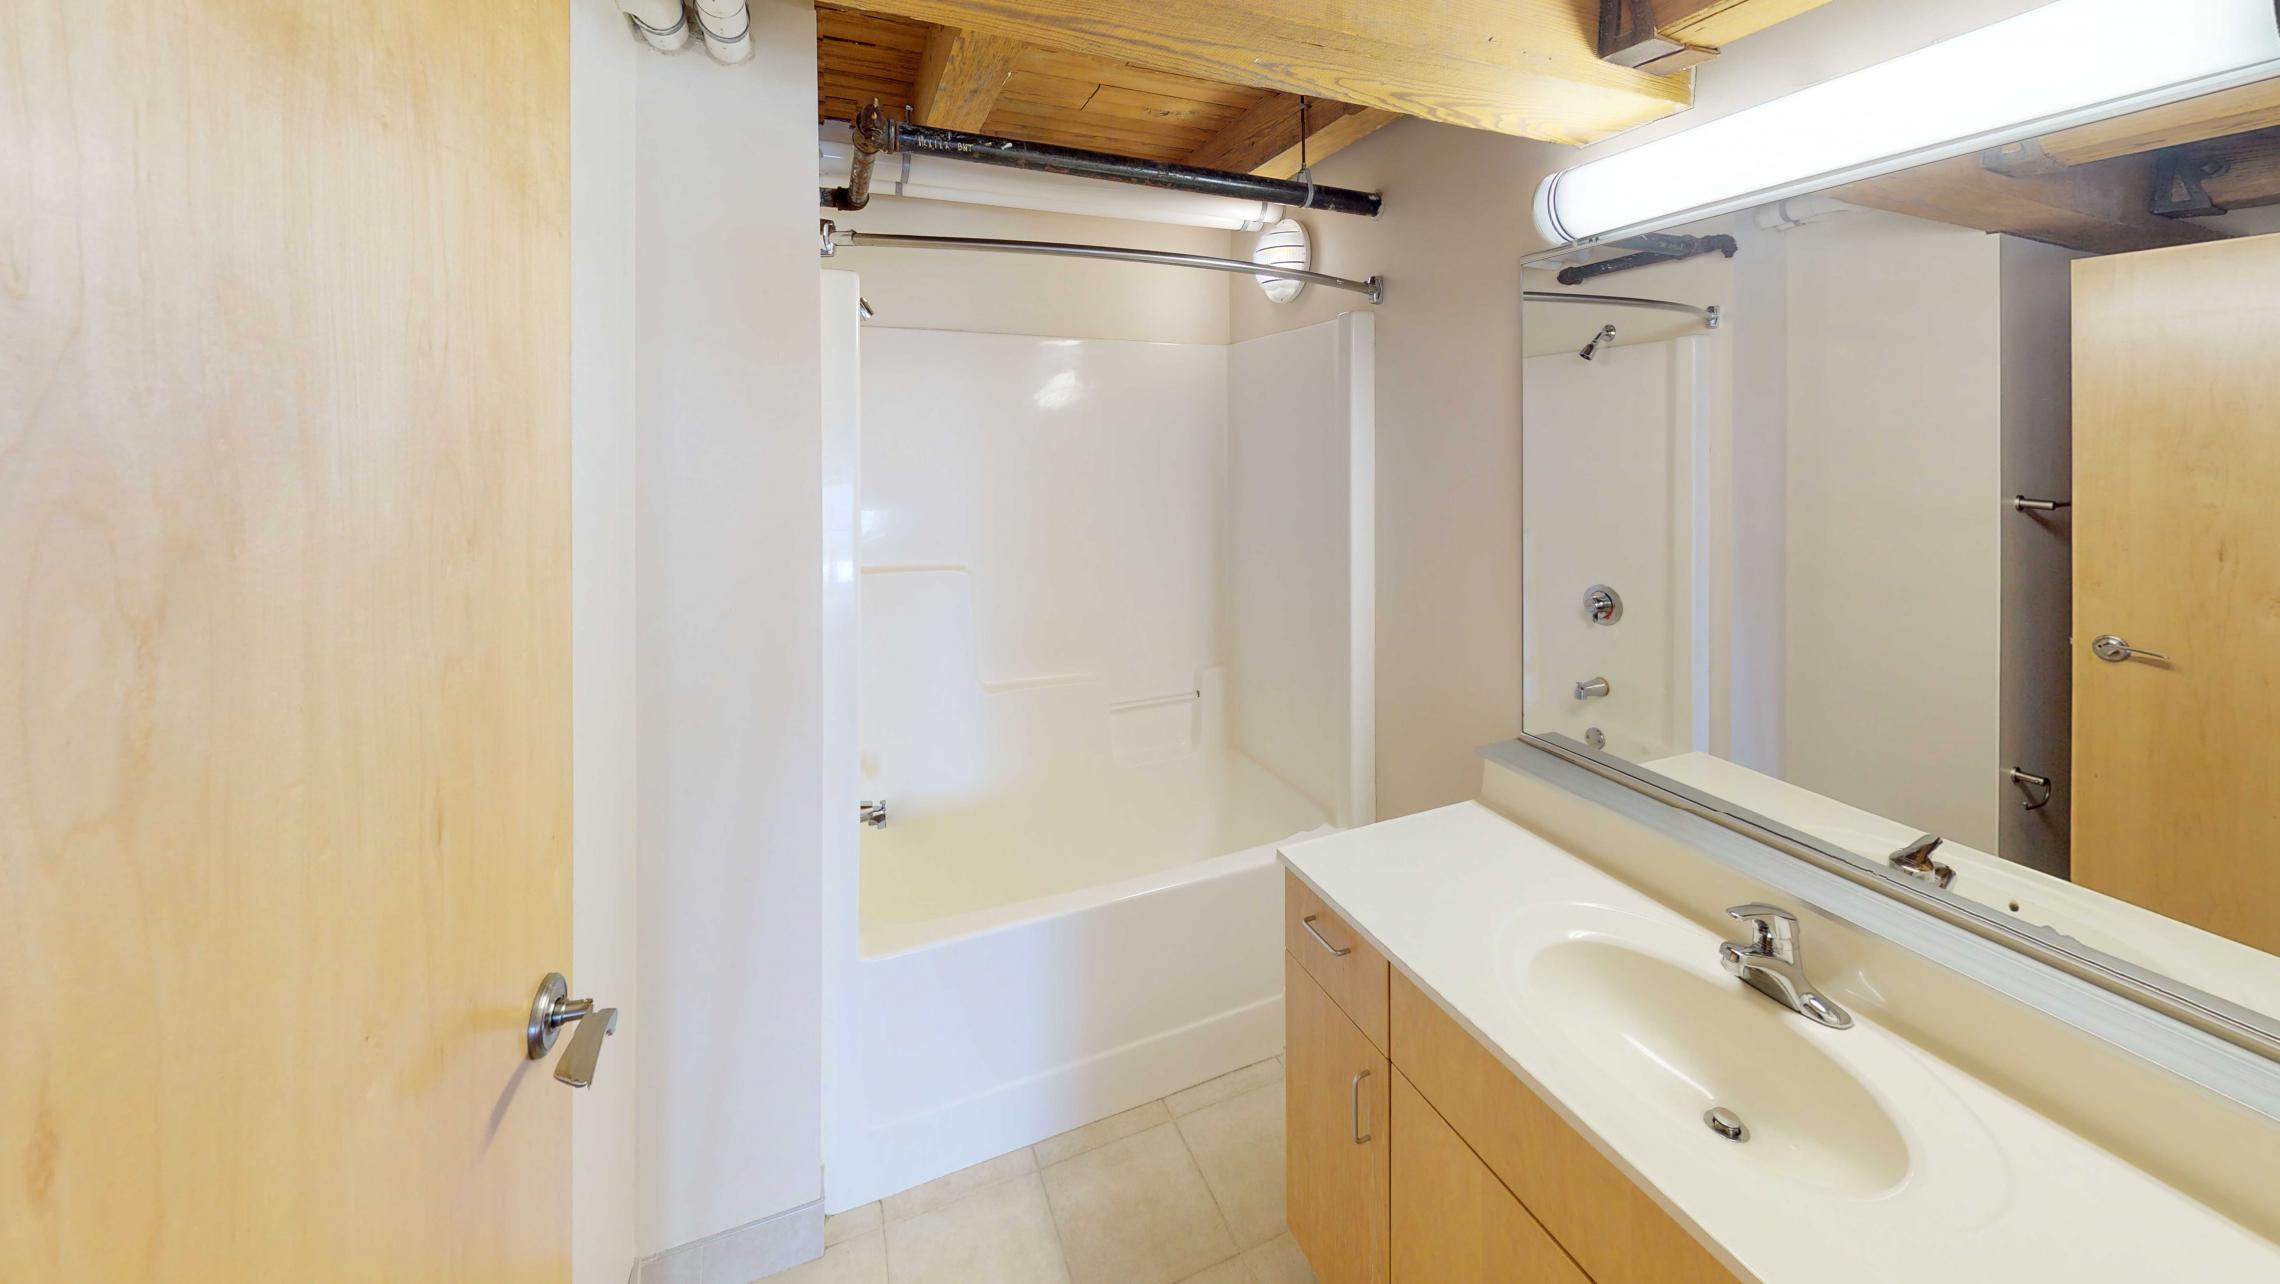 Tobacco-Lofts-E203-Bathroom-Lofted-Two-bedroom-downtown-Madison-balcony-view-design